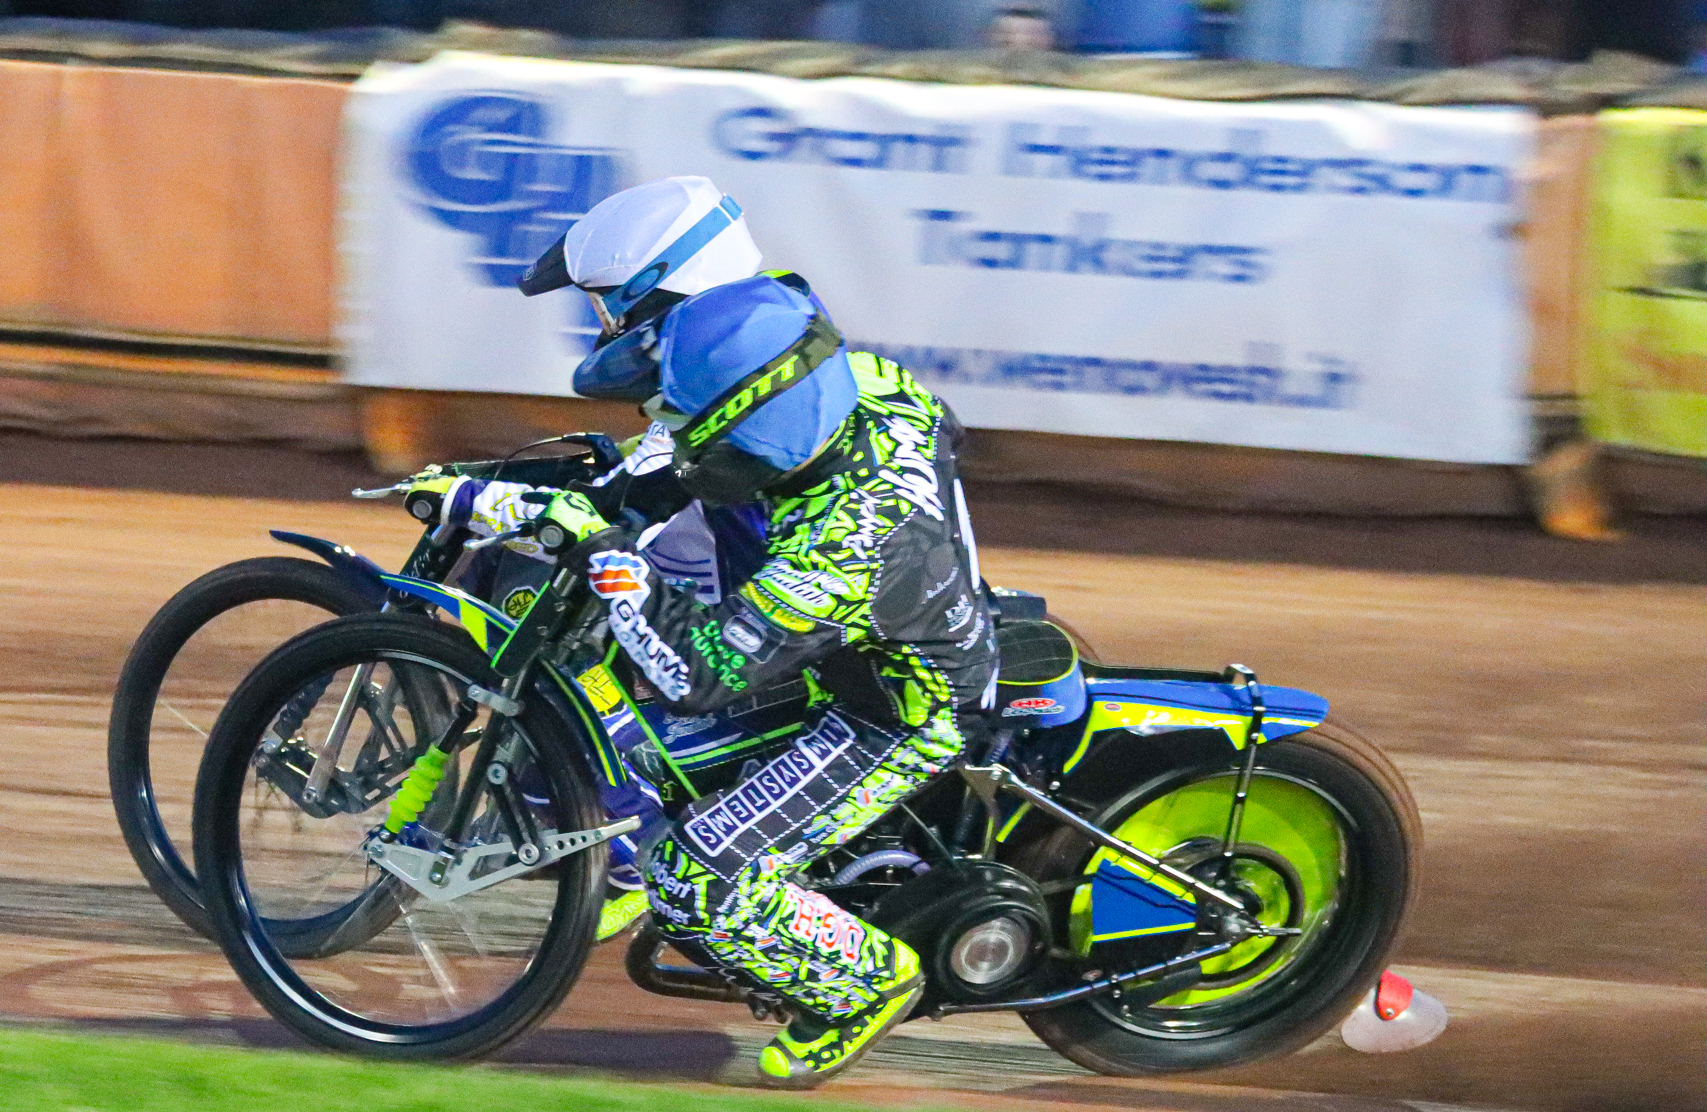 Berwick Bandits mean business as they win big over the Workington Comets